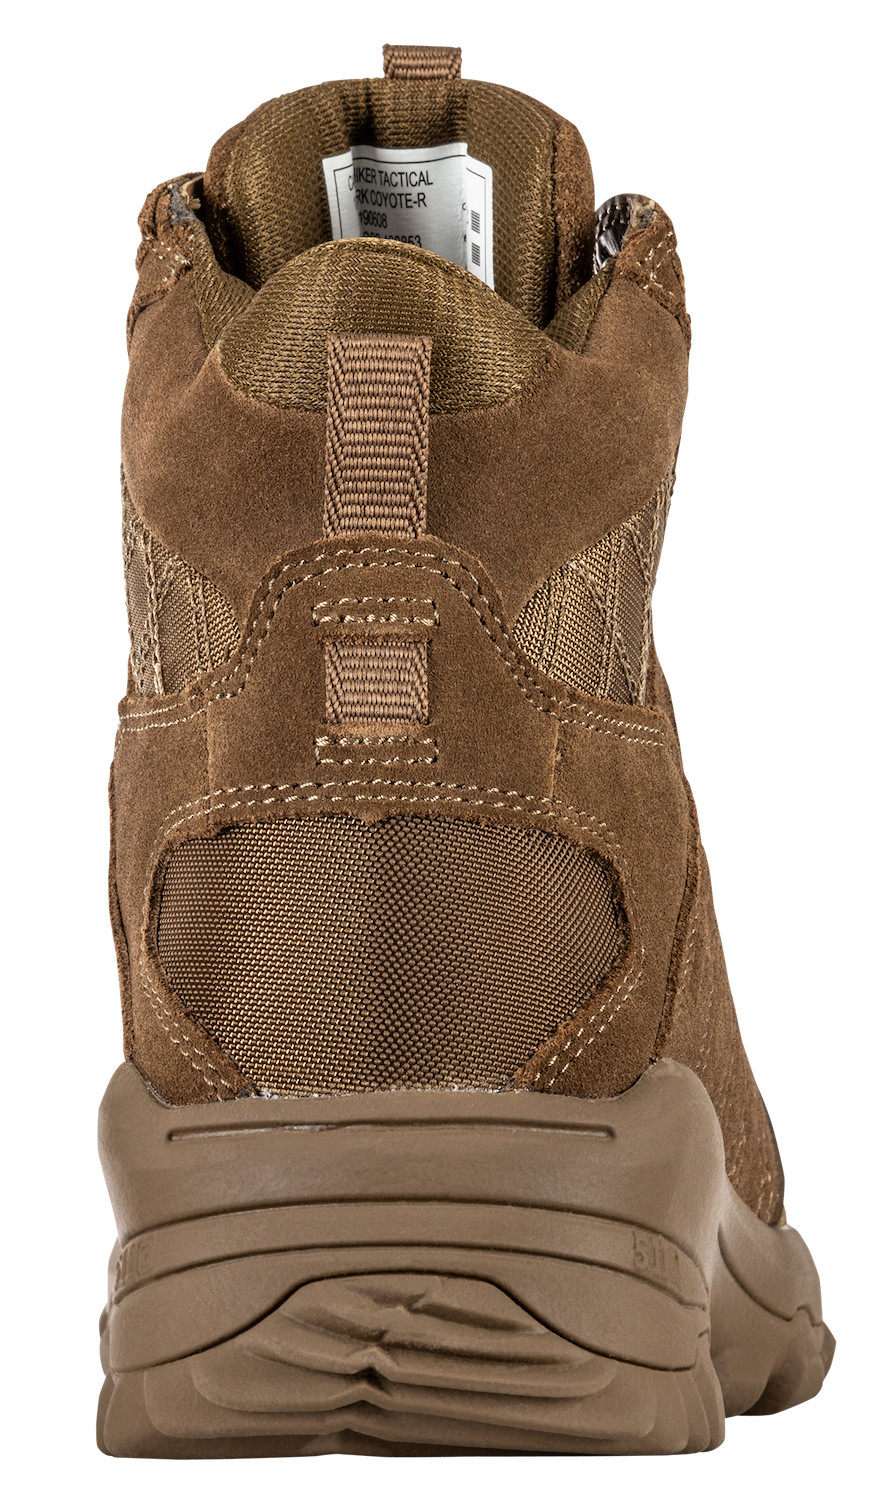 Cable Hiker Tactical Boot